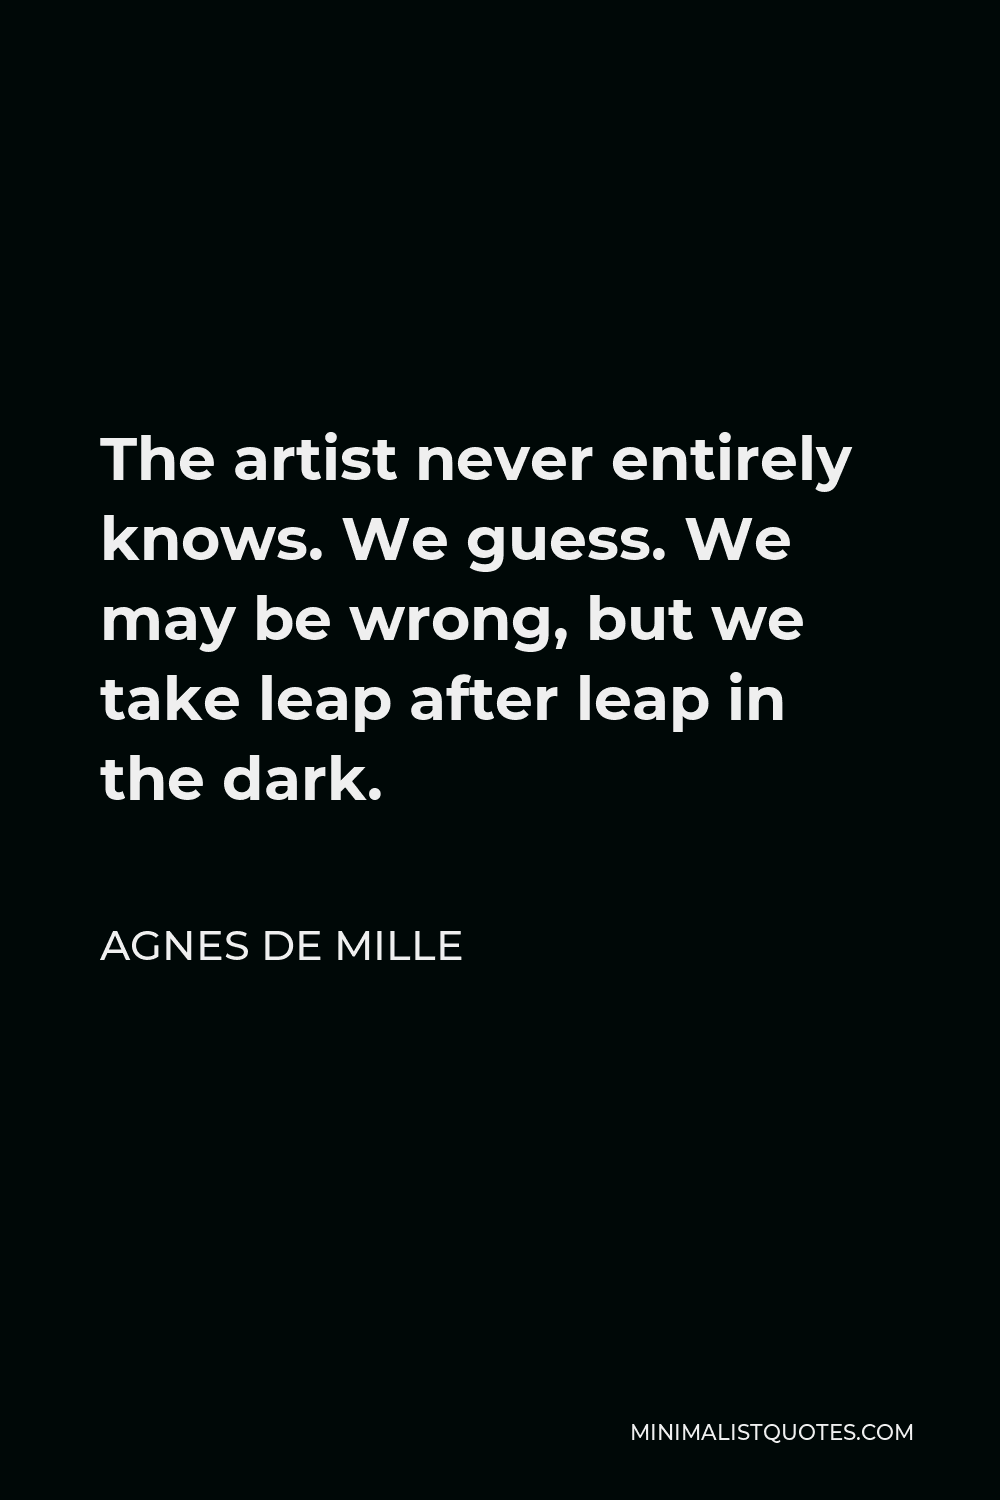 Agnes de Mille Quote - The artist never entirely knows. We guess. We may be wrong, but we take leap after leap in the dark.